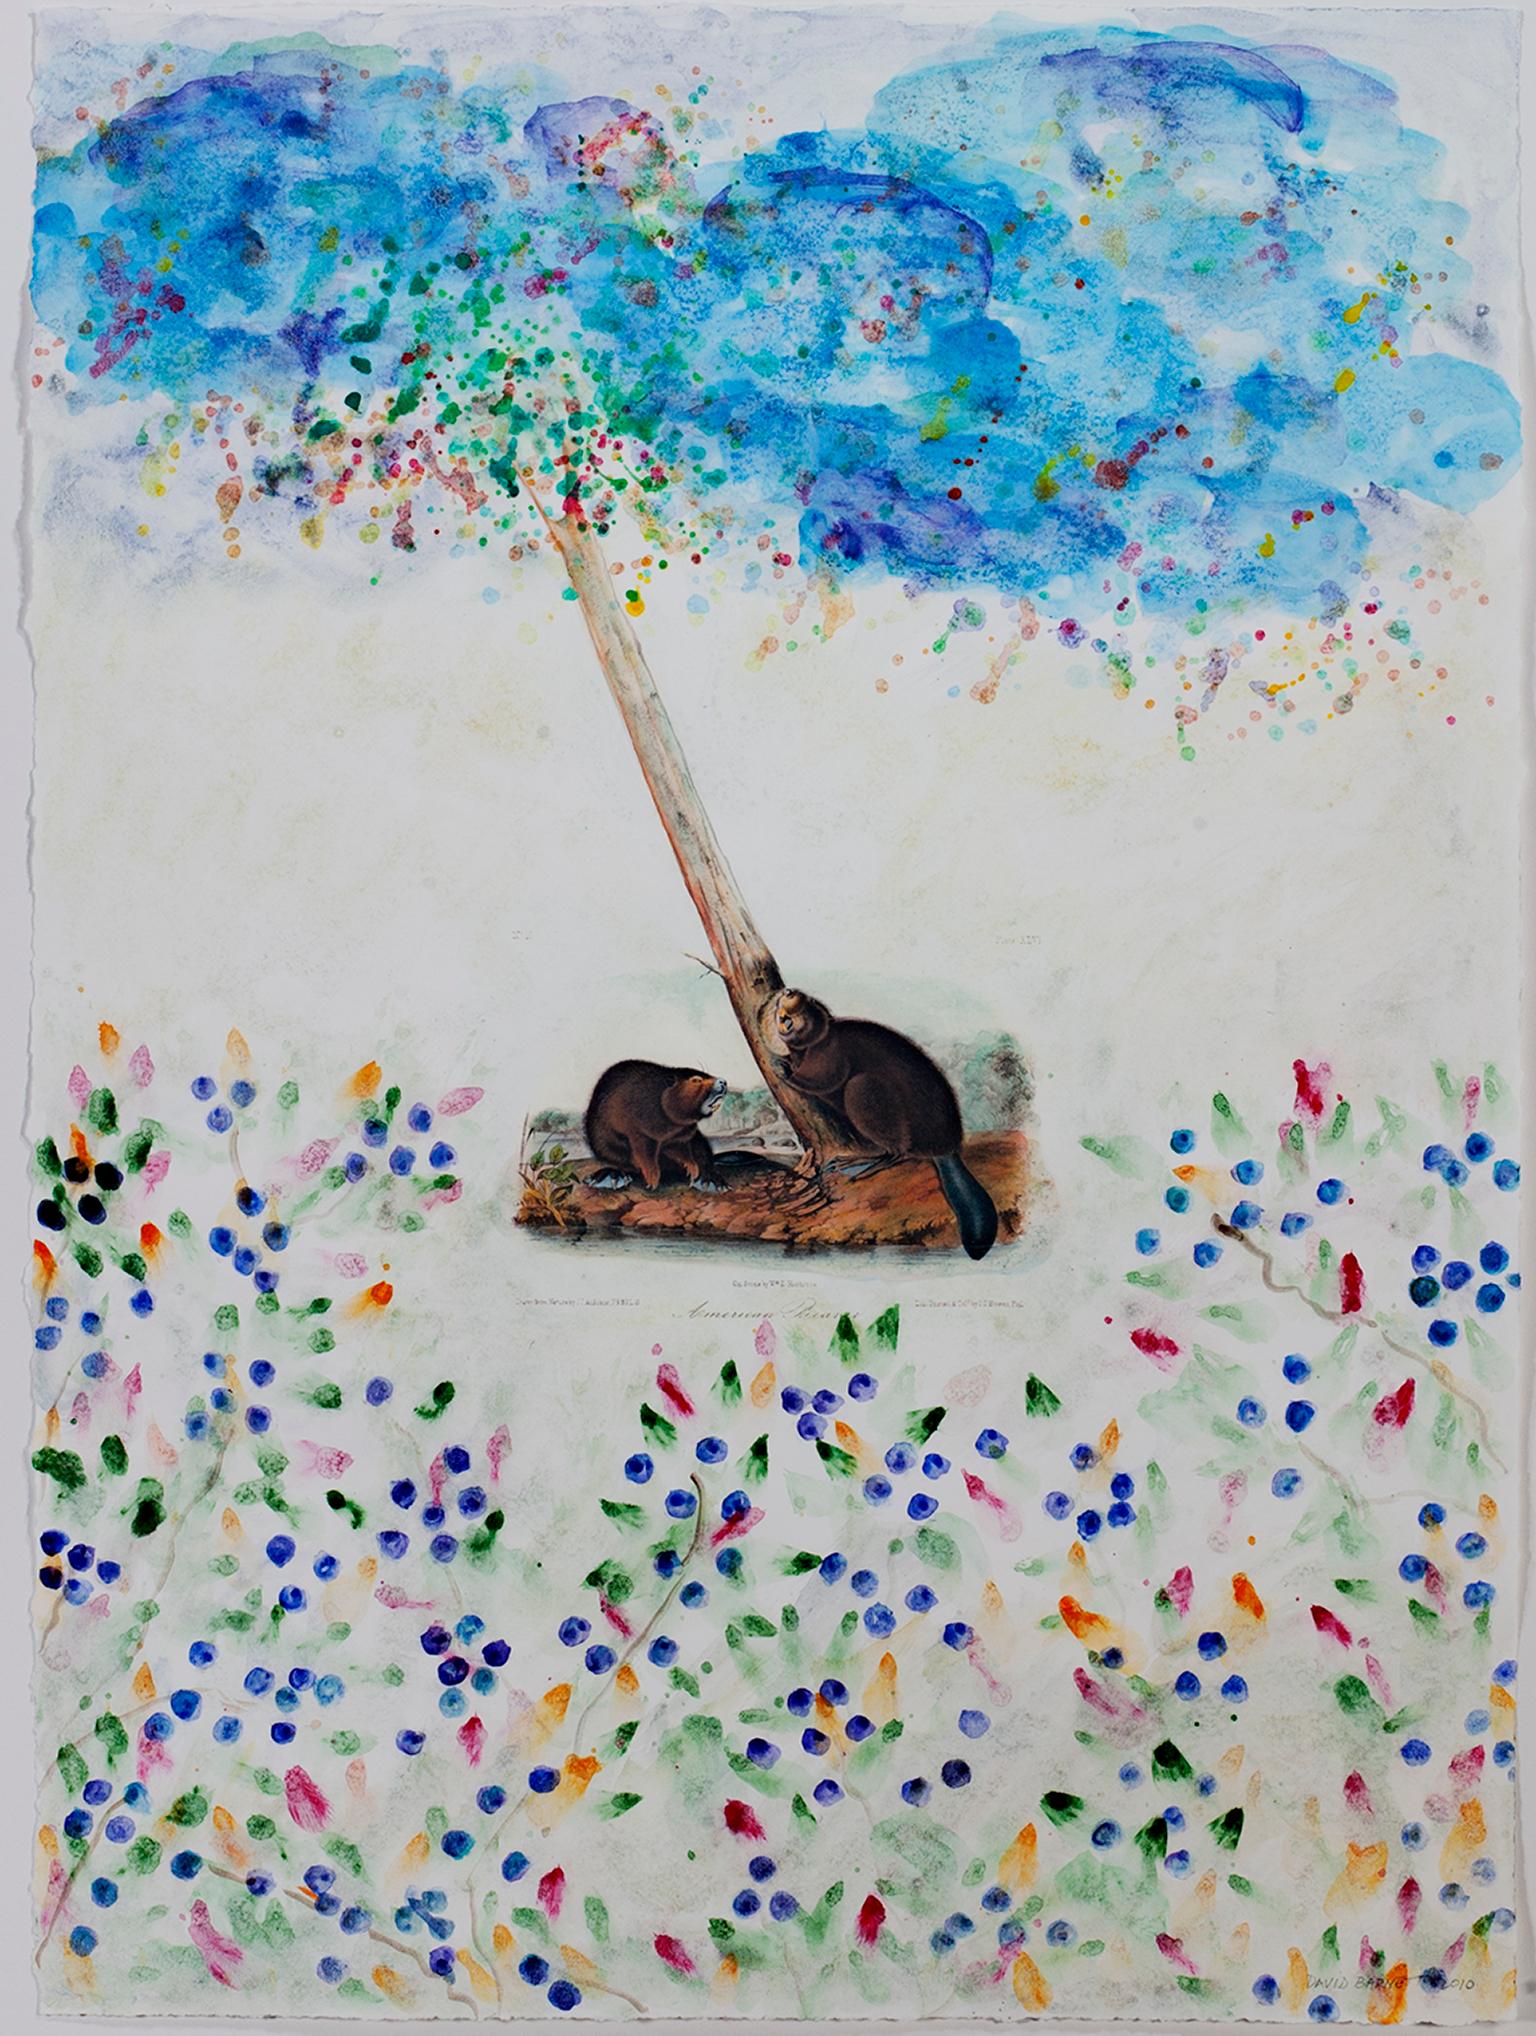 "American Beaver with Blueberries" is an original mixed media piece by David Barnett, signed in the lower right corner. The image depicts a pair of American beavers at the foot of tree branch that stretches into the clear blue sky, dotted with a